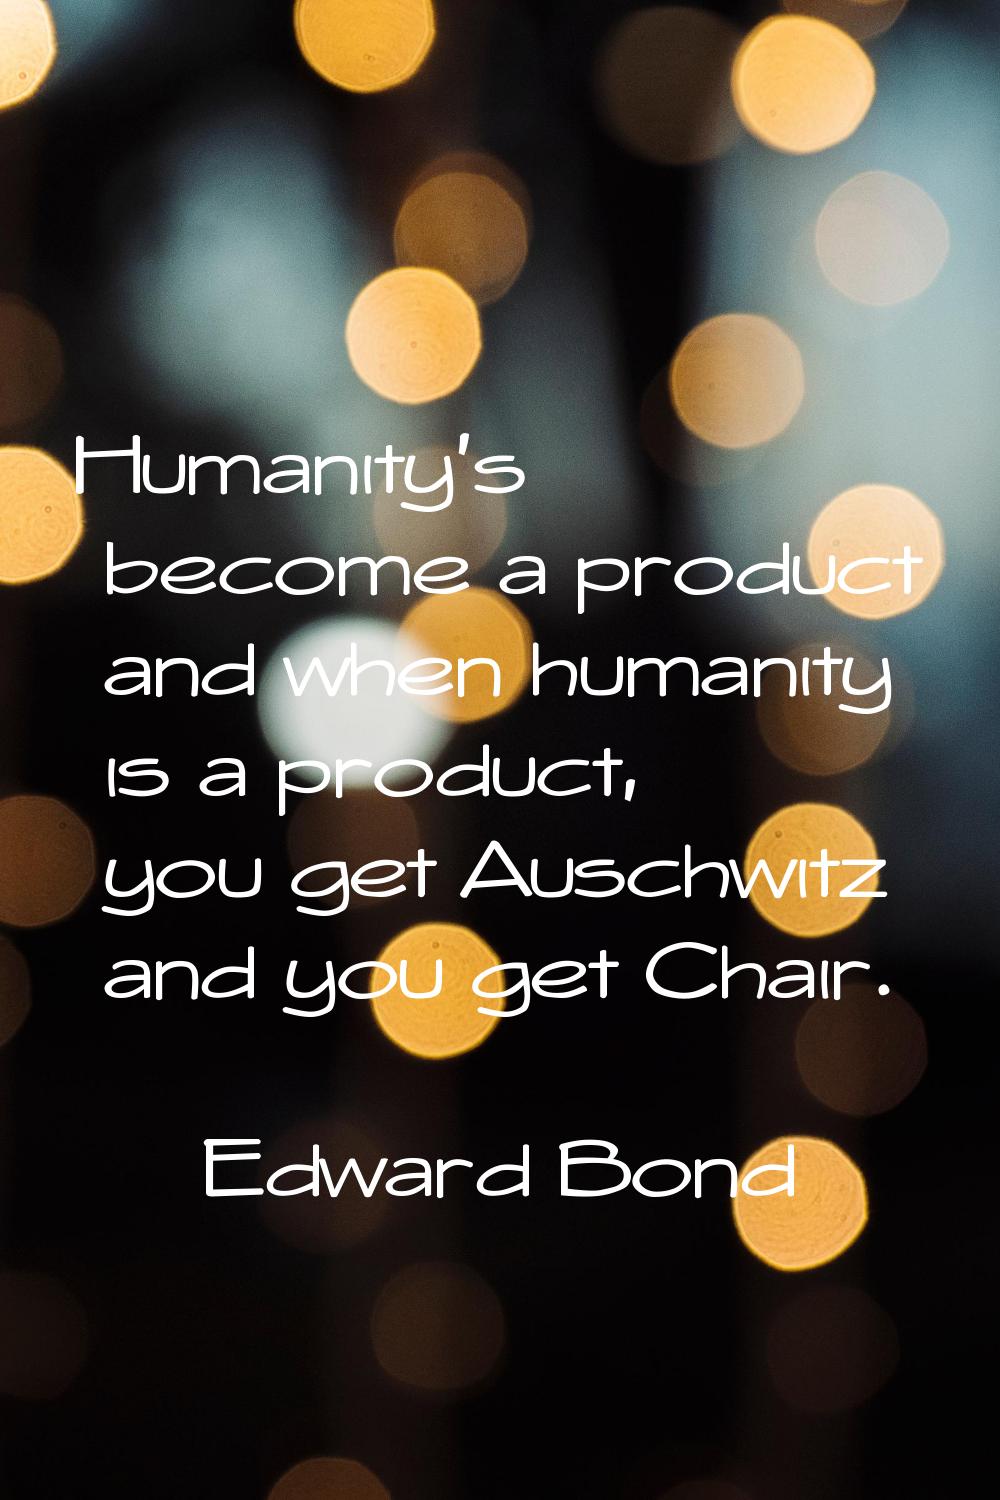 Humanity's become a product and when humanity is a product, you get Auschwitz and you get Chair.